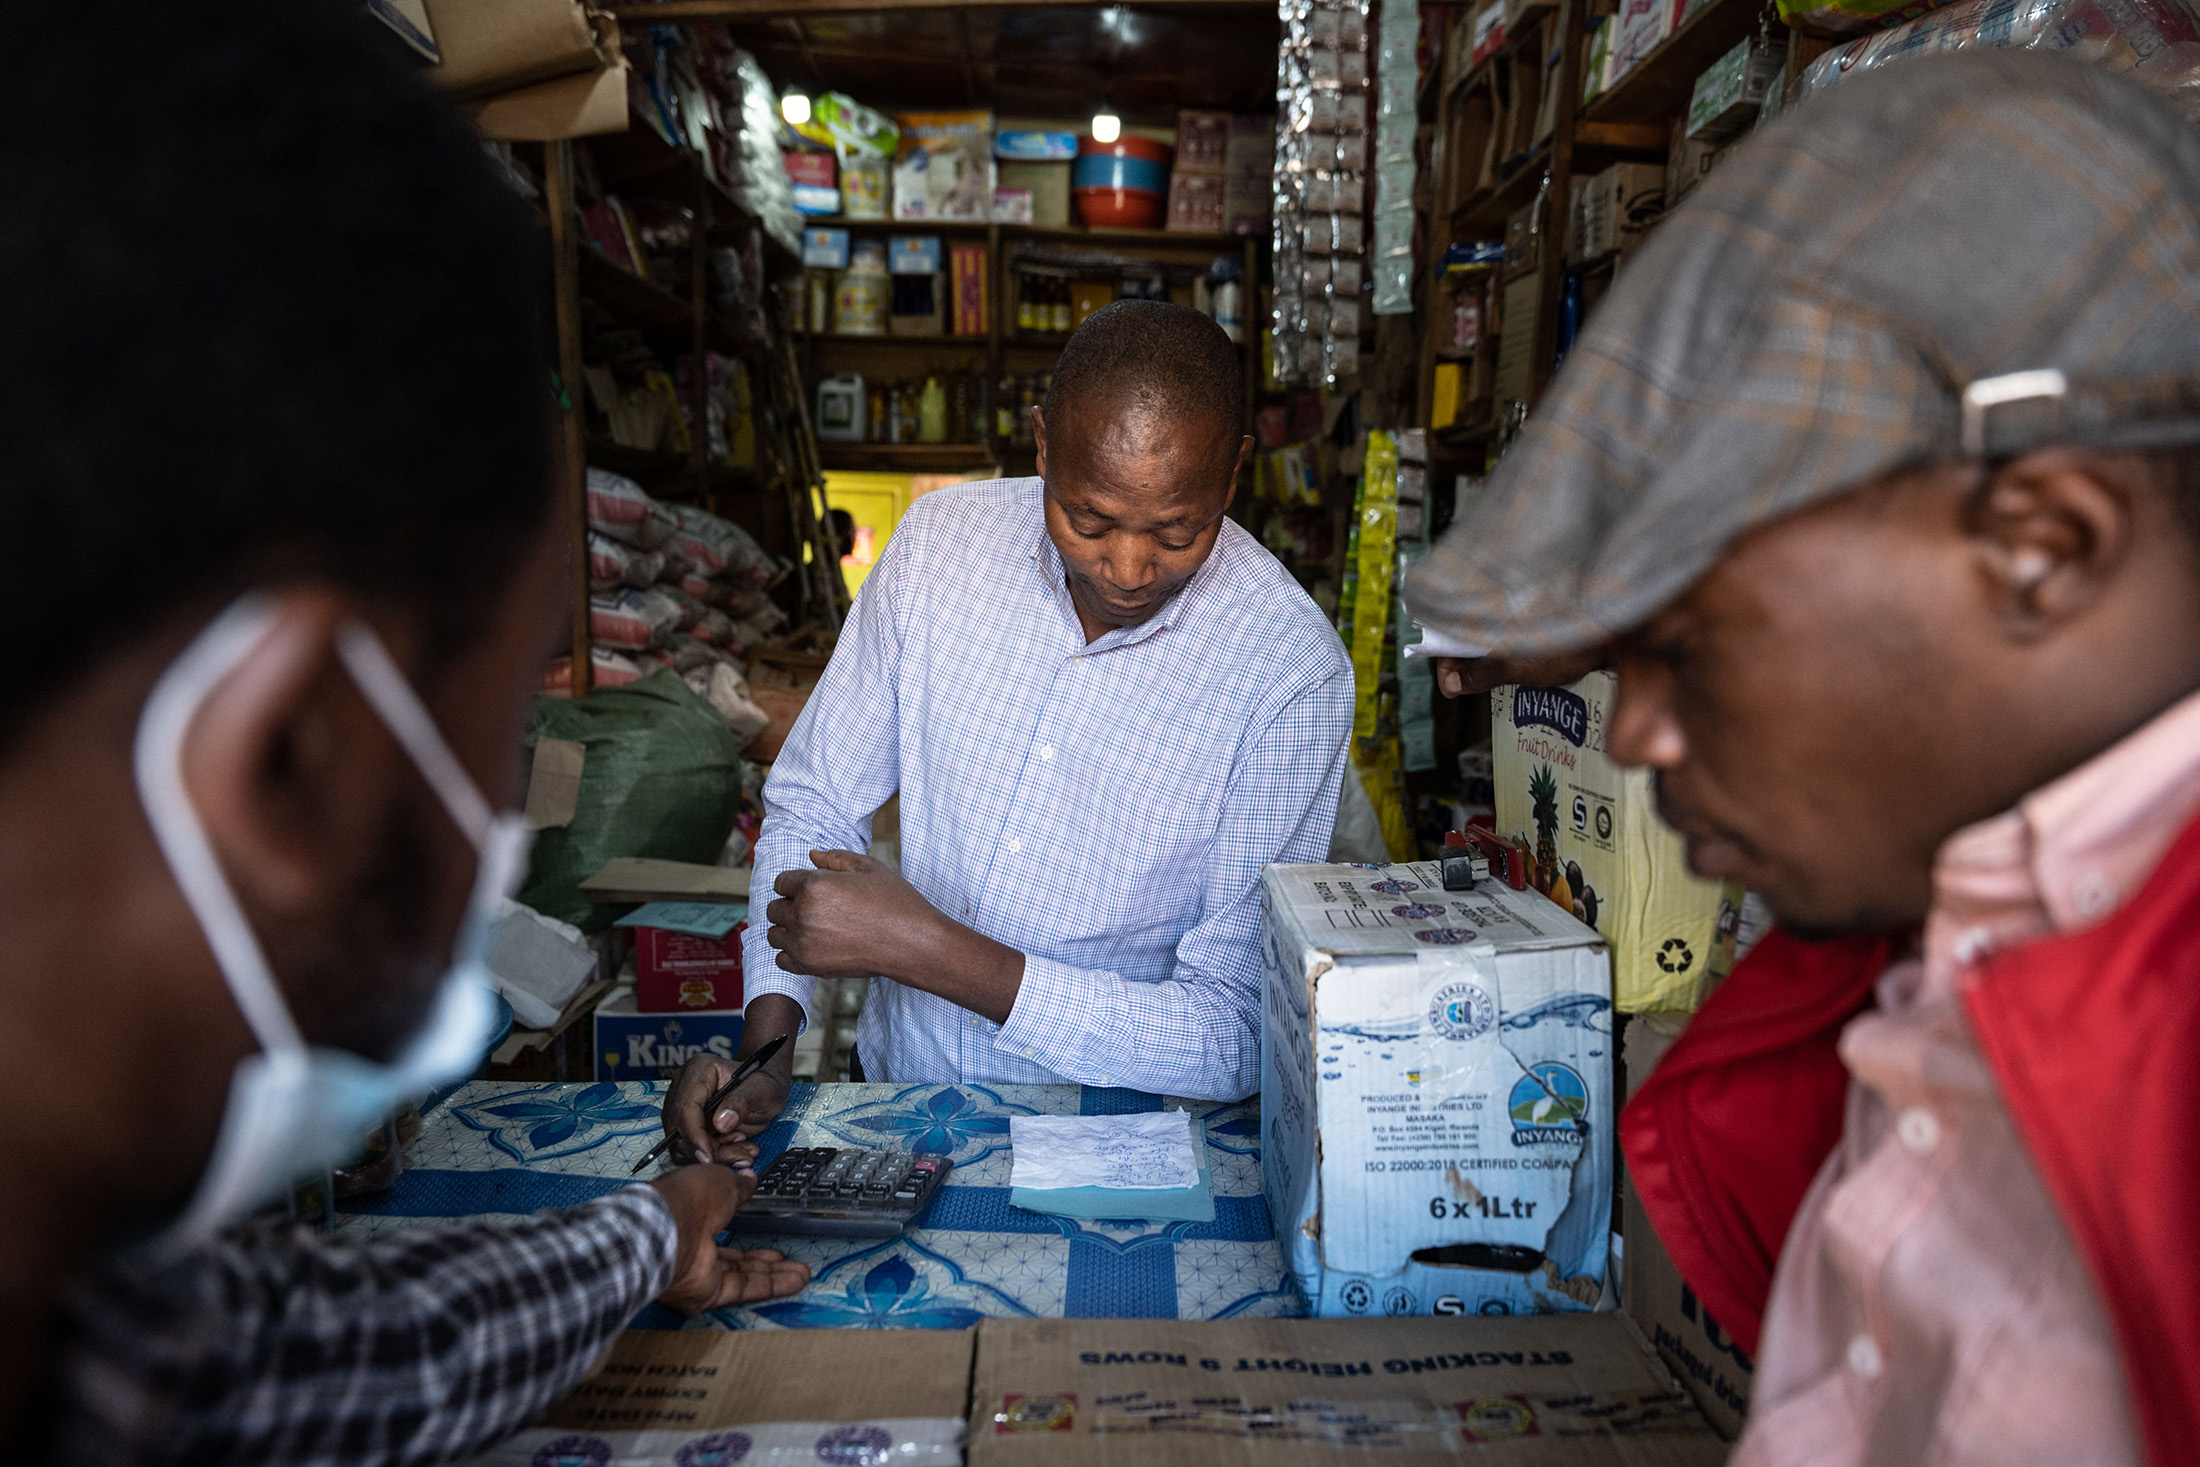 A shop owner negotiates with customers in Kigali, Rwanda, on March 23.